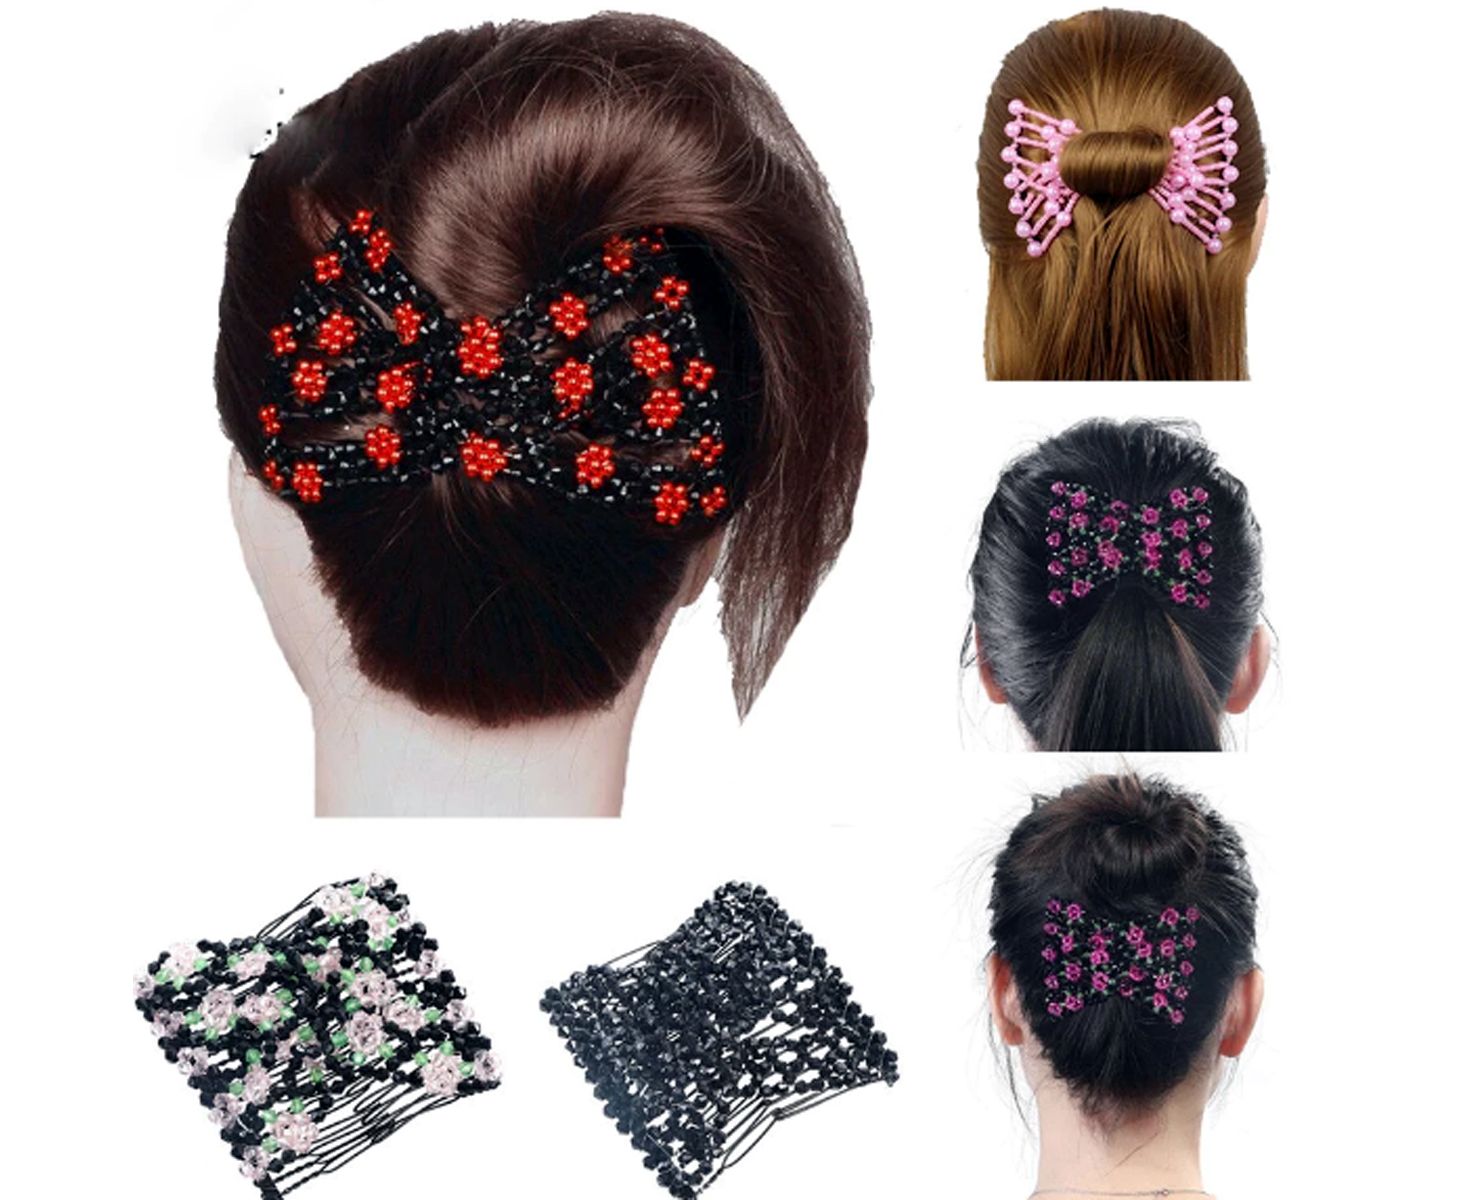 5 Hair Accessories Trends to Try this Summer 2021